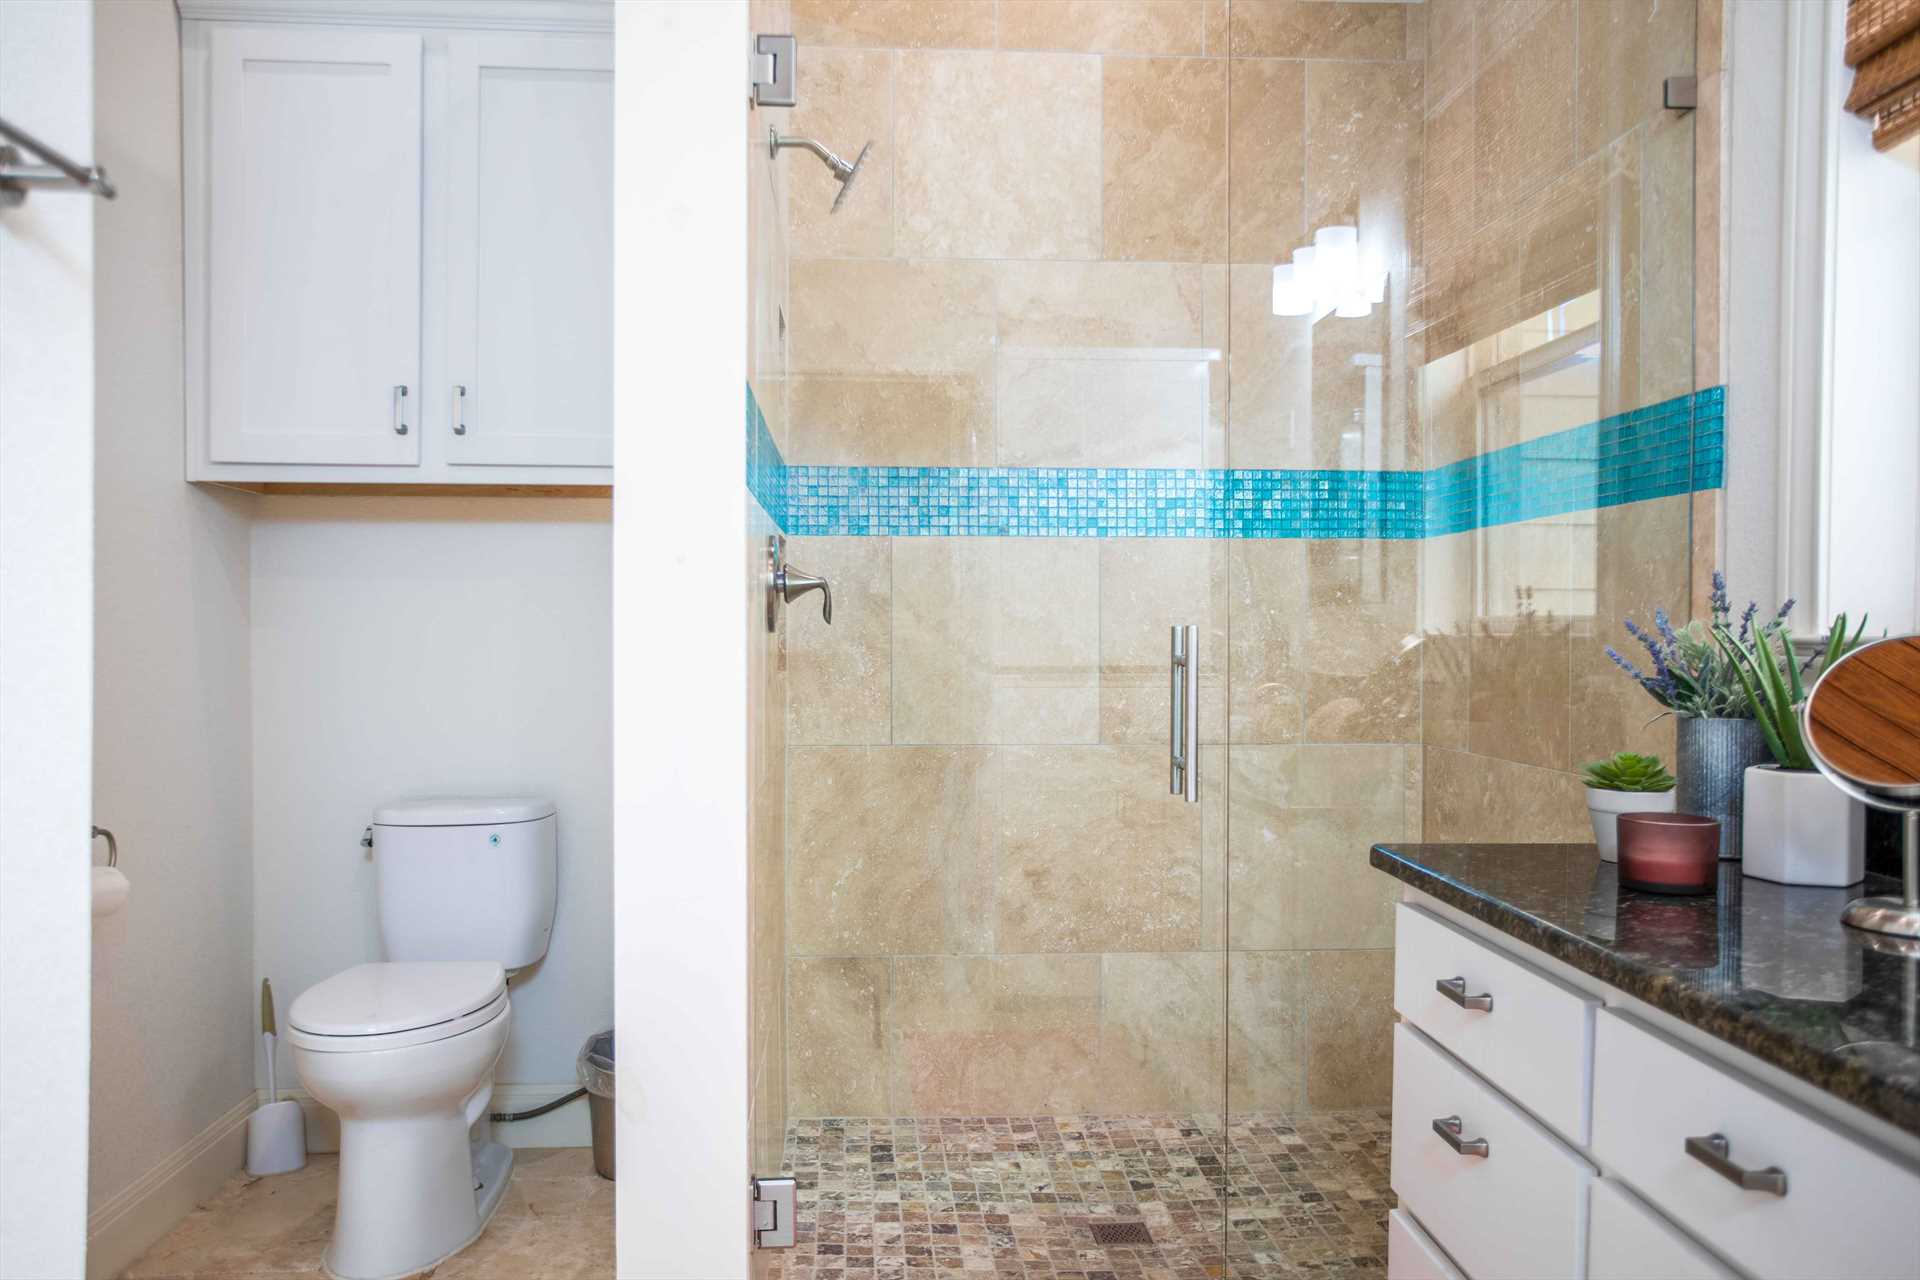                                                 The immaculately-clean full bath features a stylish and roomy tiled shower...and bath linens are provided here, too!